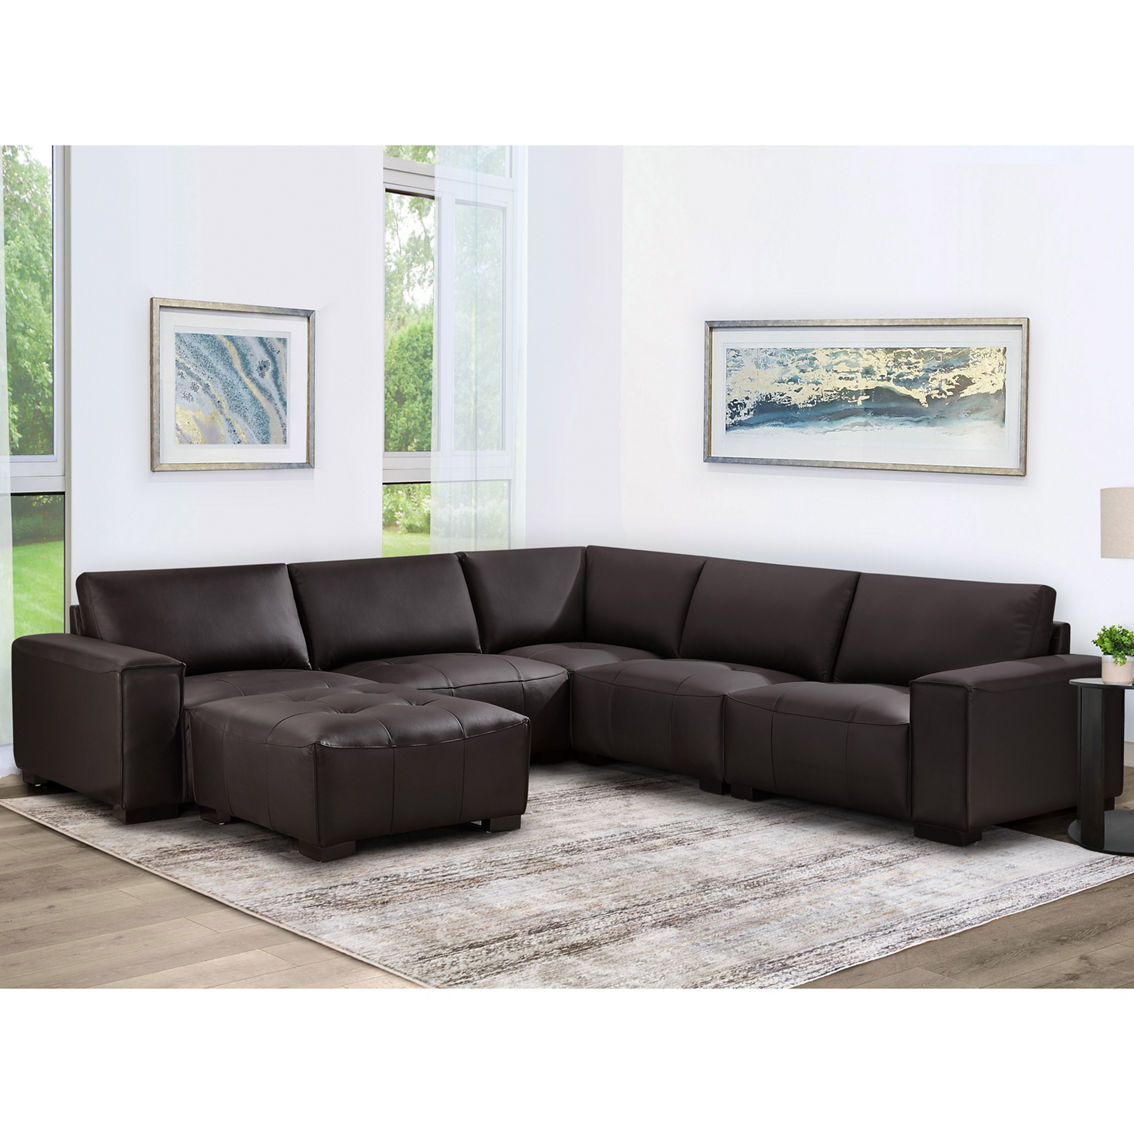 Abbyson Teagan Leather Modular Sectional 6 pc. - Image 6 of 9